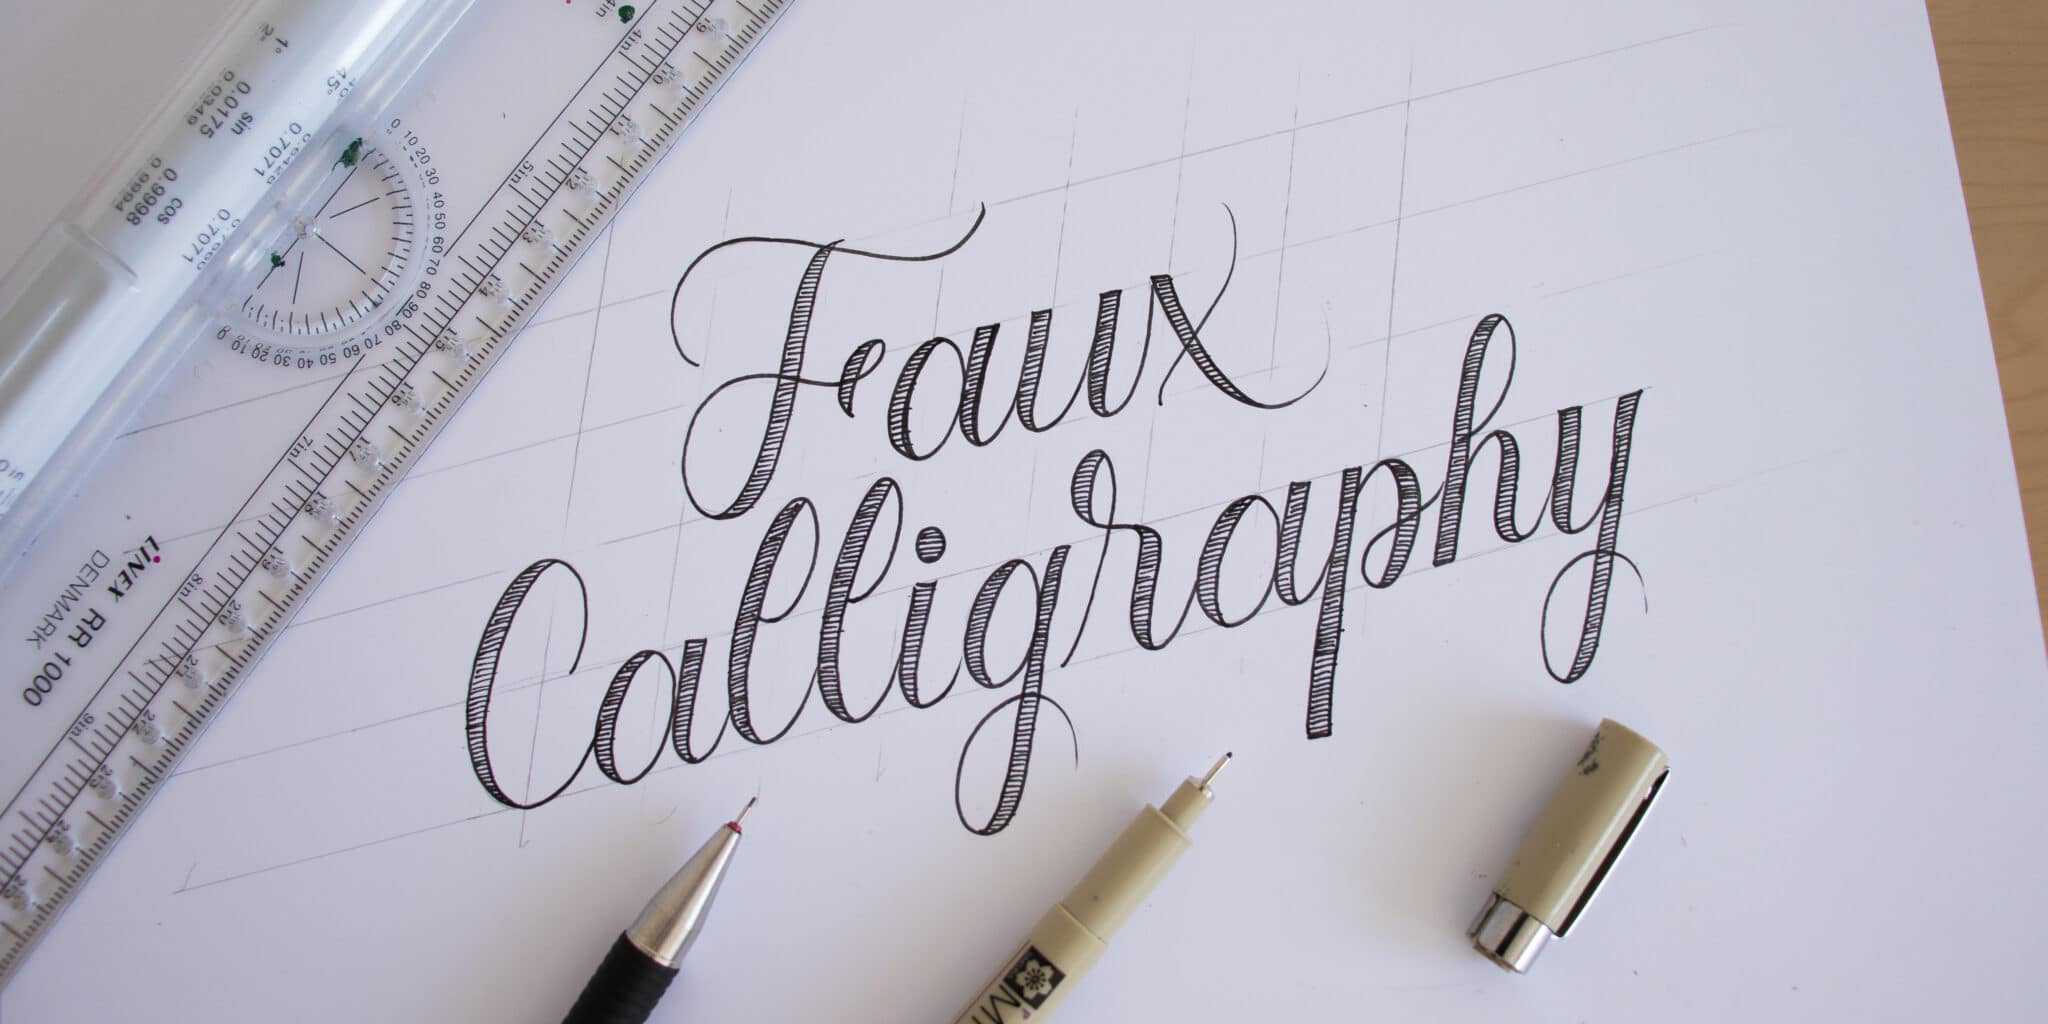 Easy Calligraphy Practice and Calligraphy Training